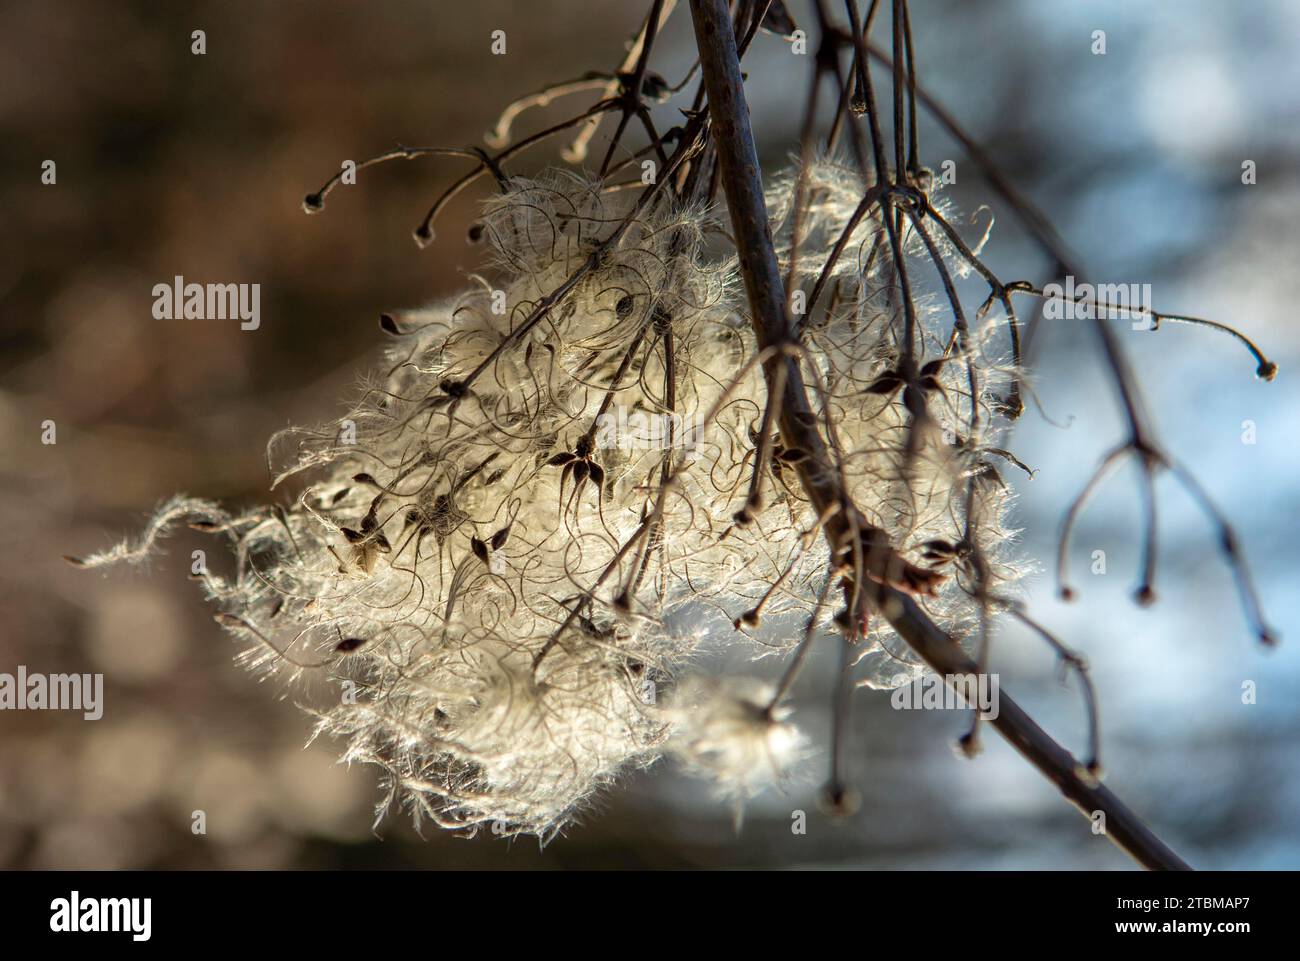 Seed heads with silky appendages of in winter. The plant is also known as old man's beard or traveller's joy (clematis vitalba) Stock Photo